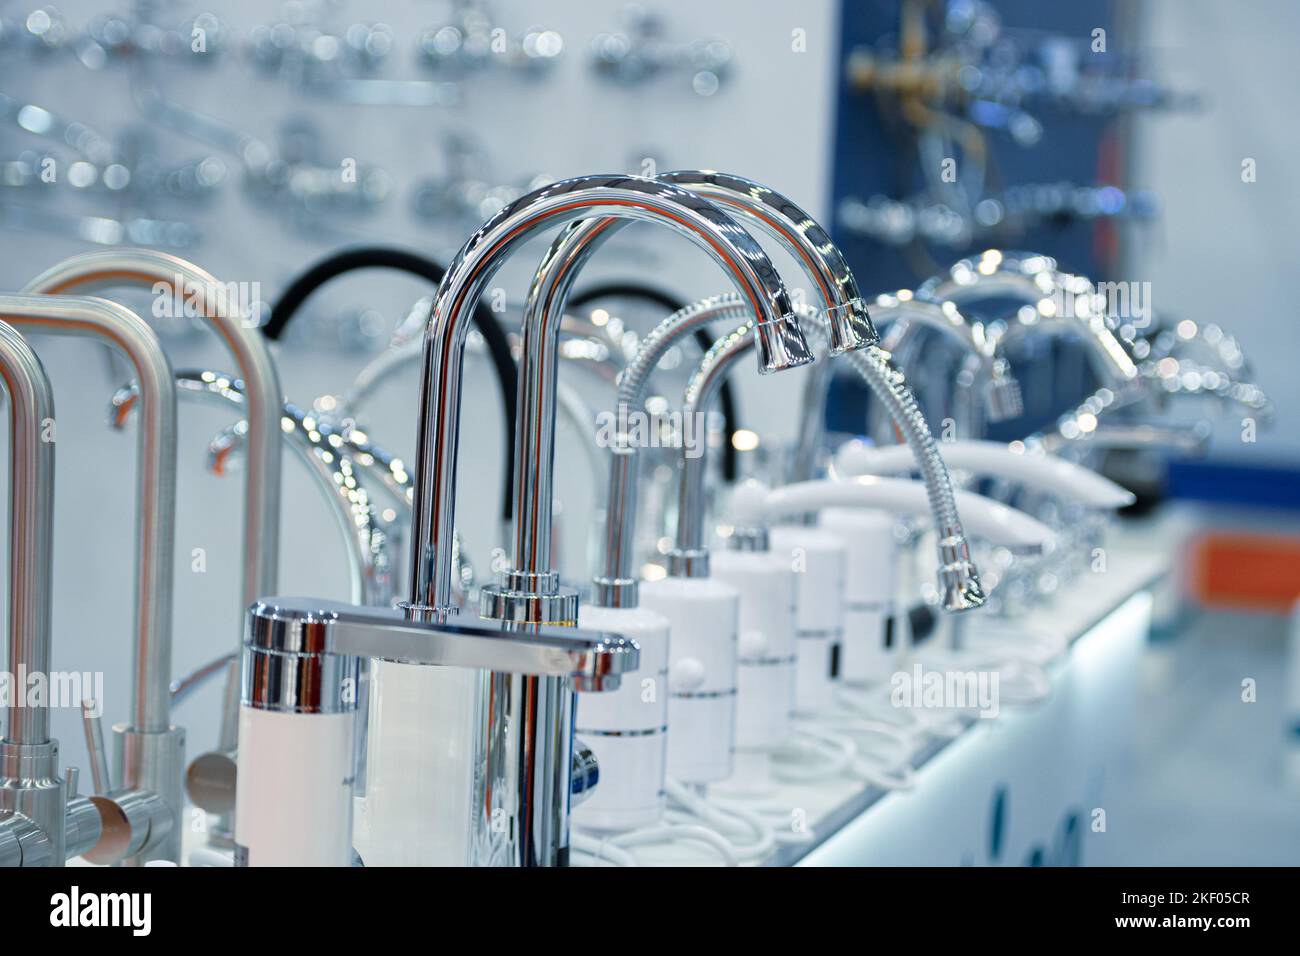 Silver kitchen faucet set with instantaneous water heater Stock Photo